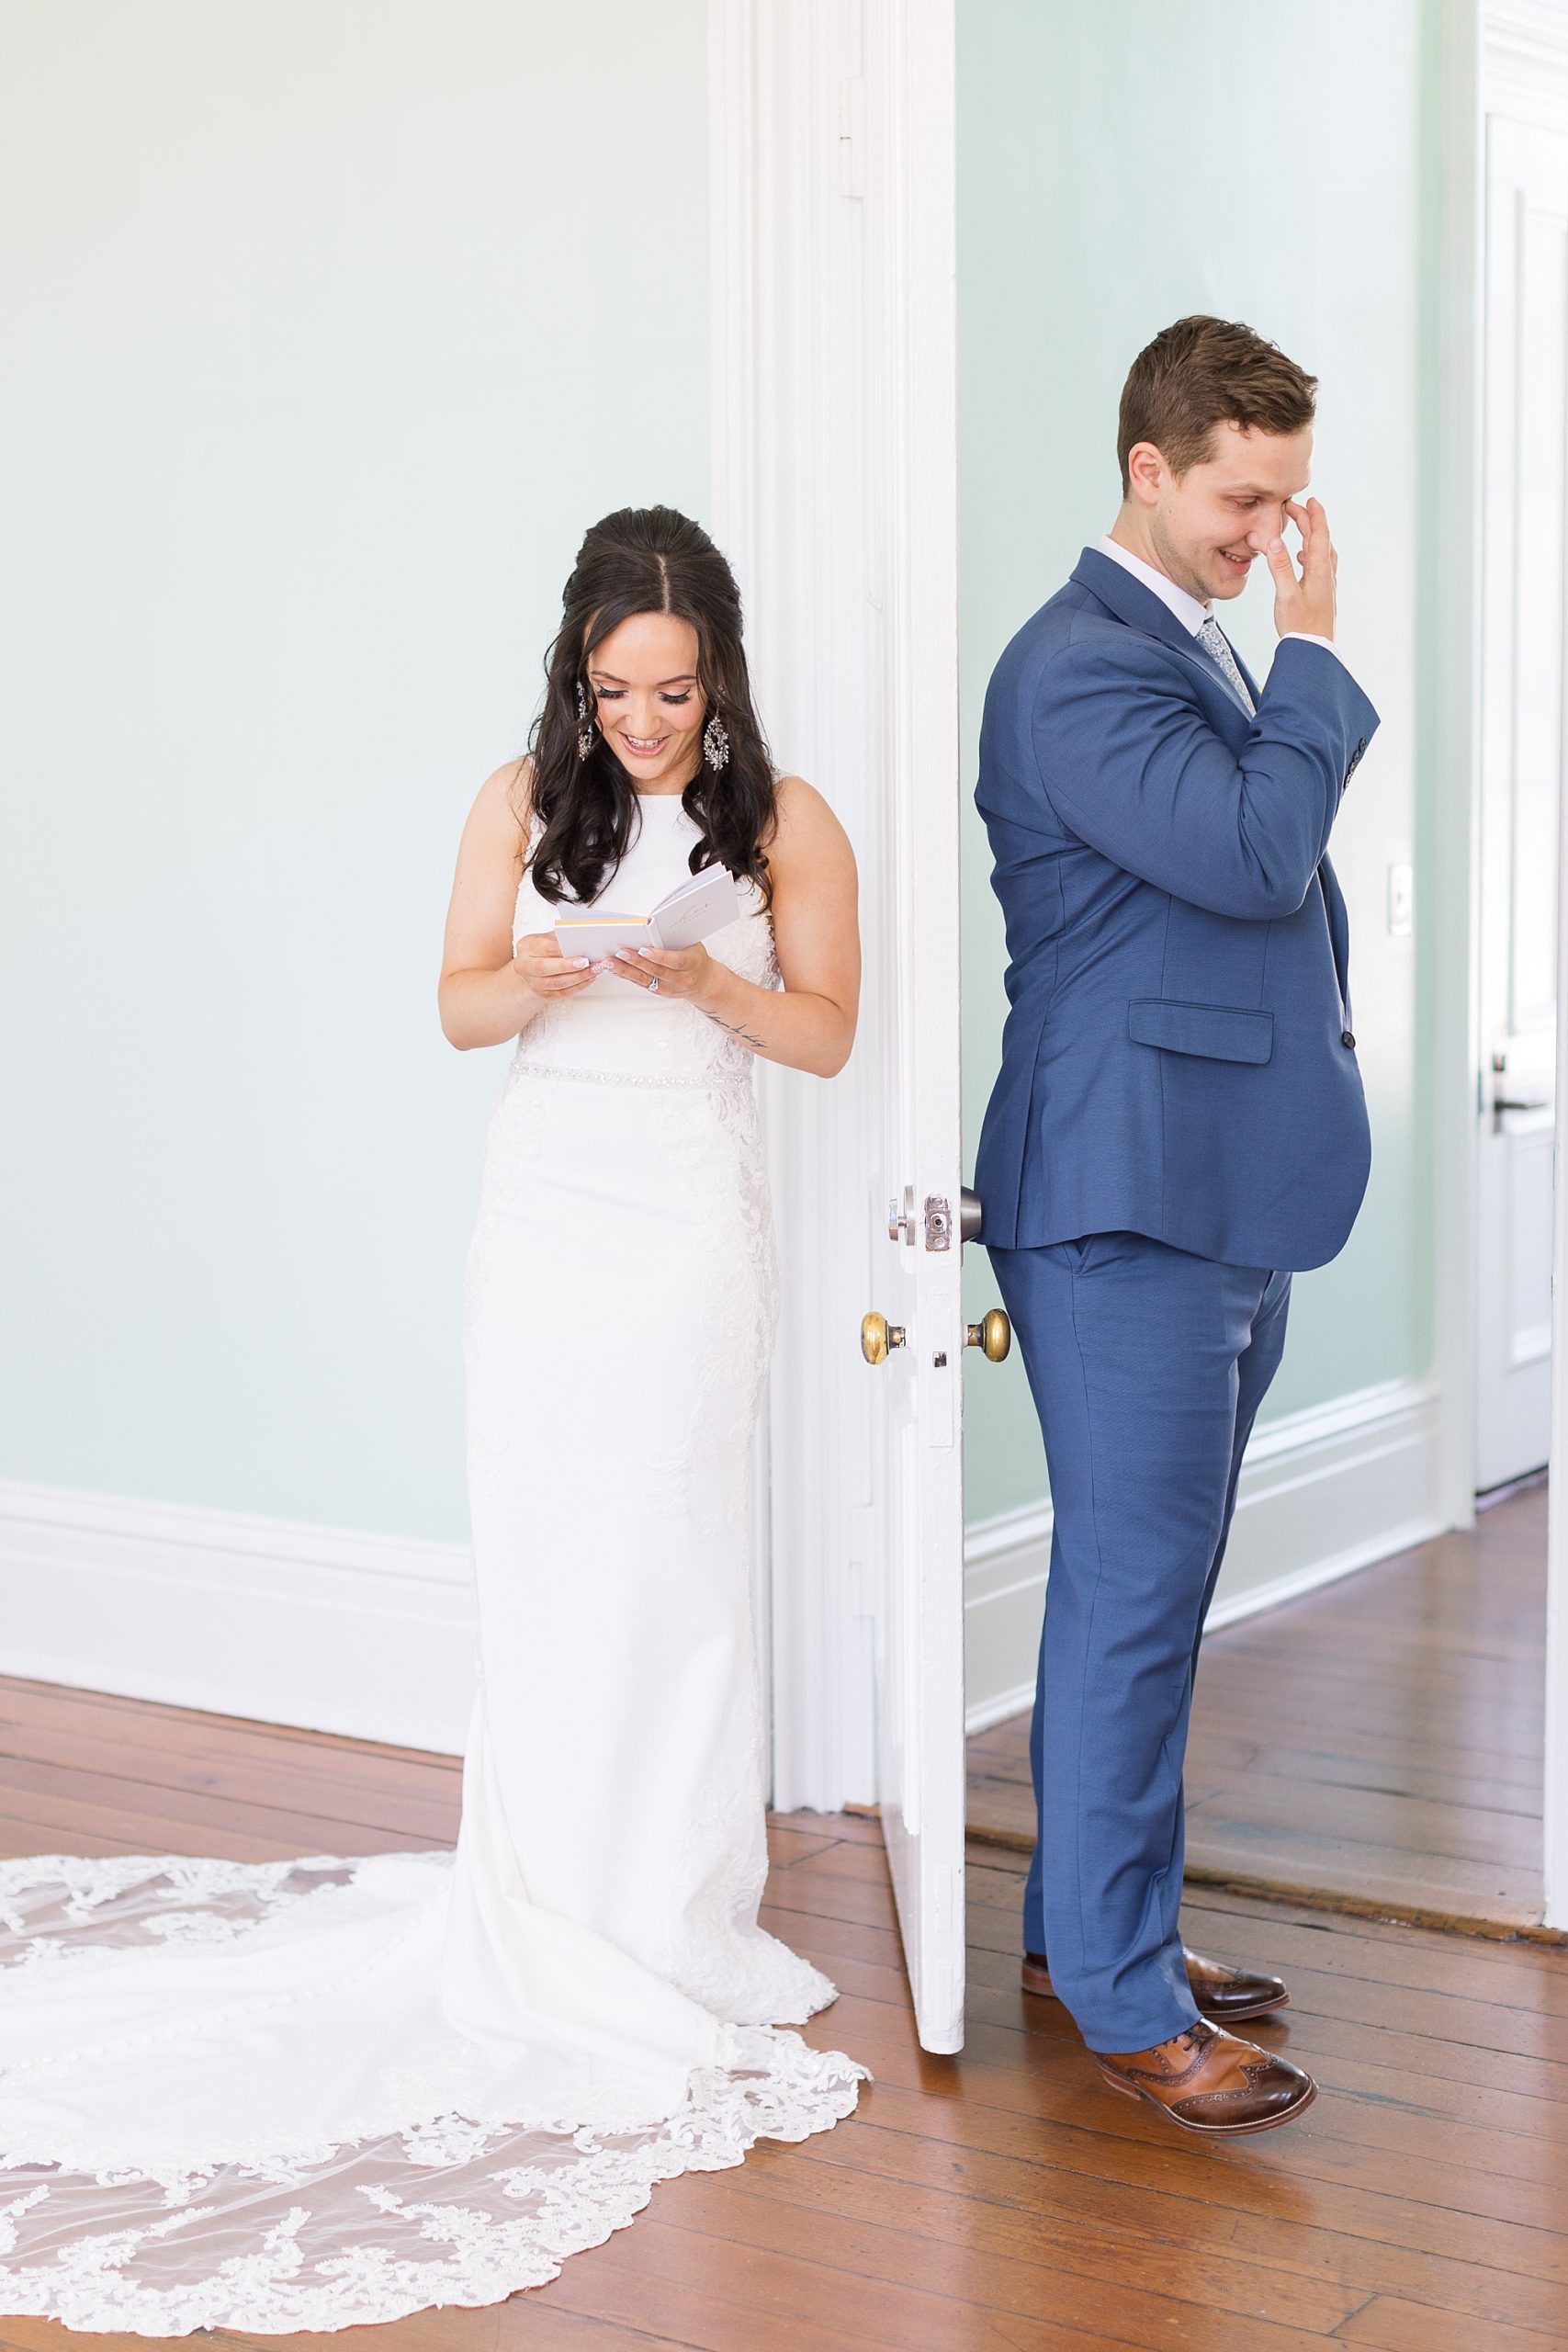 Bride and groom reading notes to each other behind door | Raleigh NC Wedding Photographer